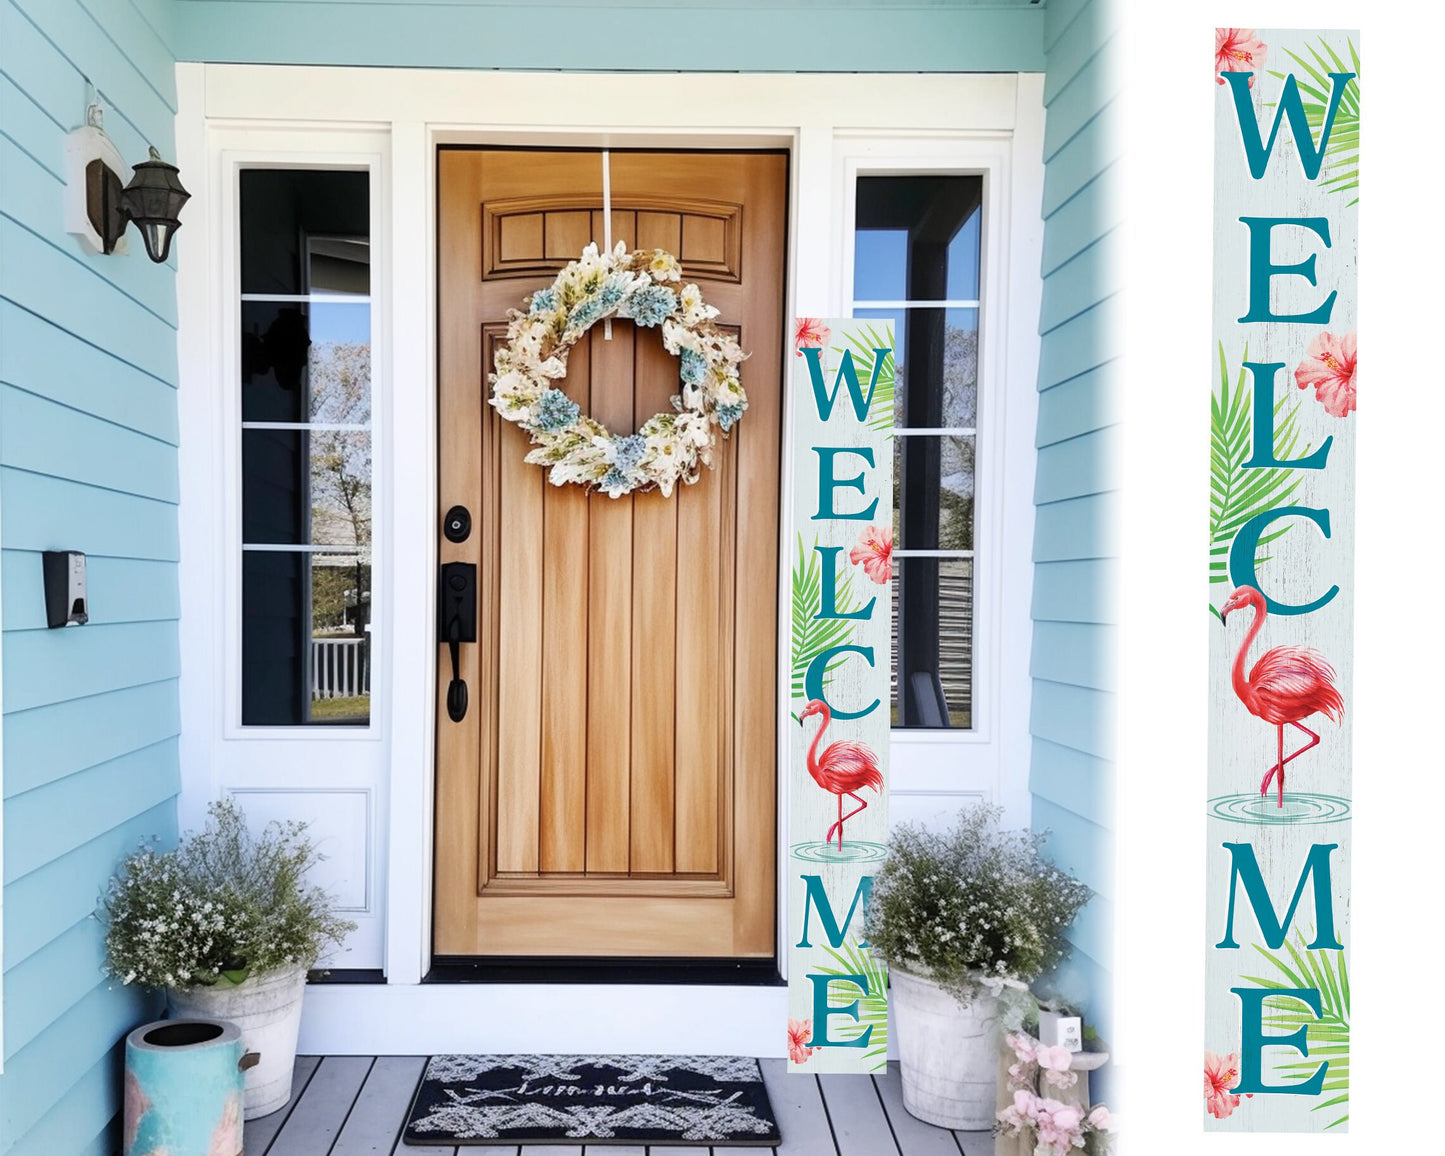 72in Flamingo Welcome Sign | Front Door Porch Sign | Coastal Summer Welcome Sign | Farmhouse Home Decor